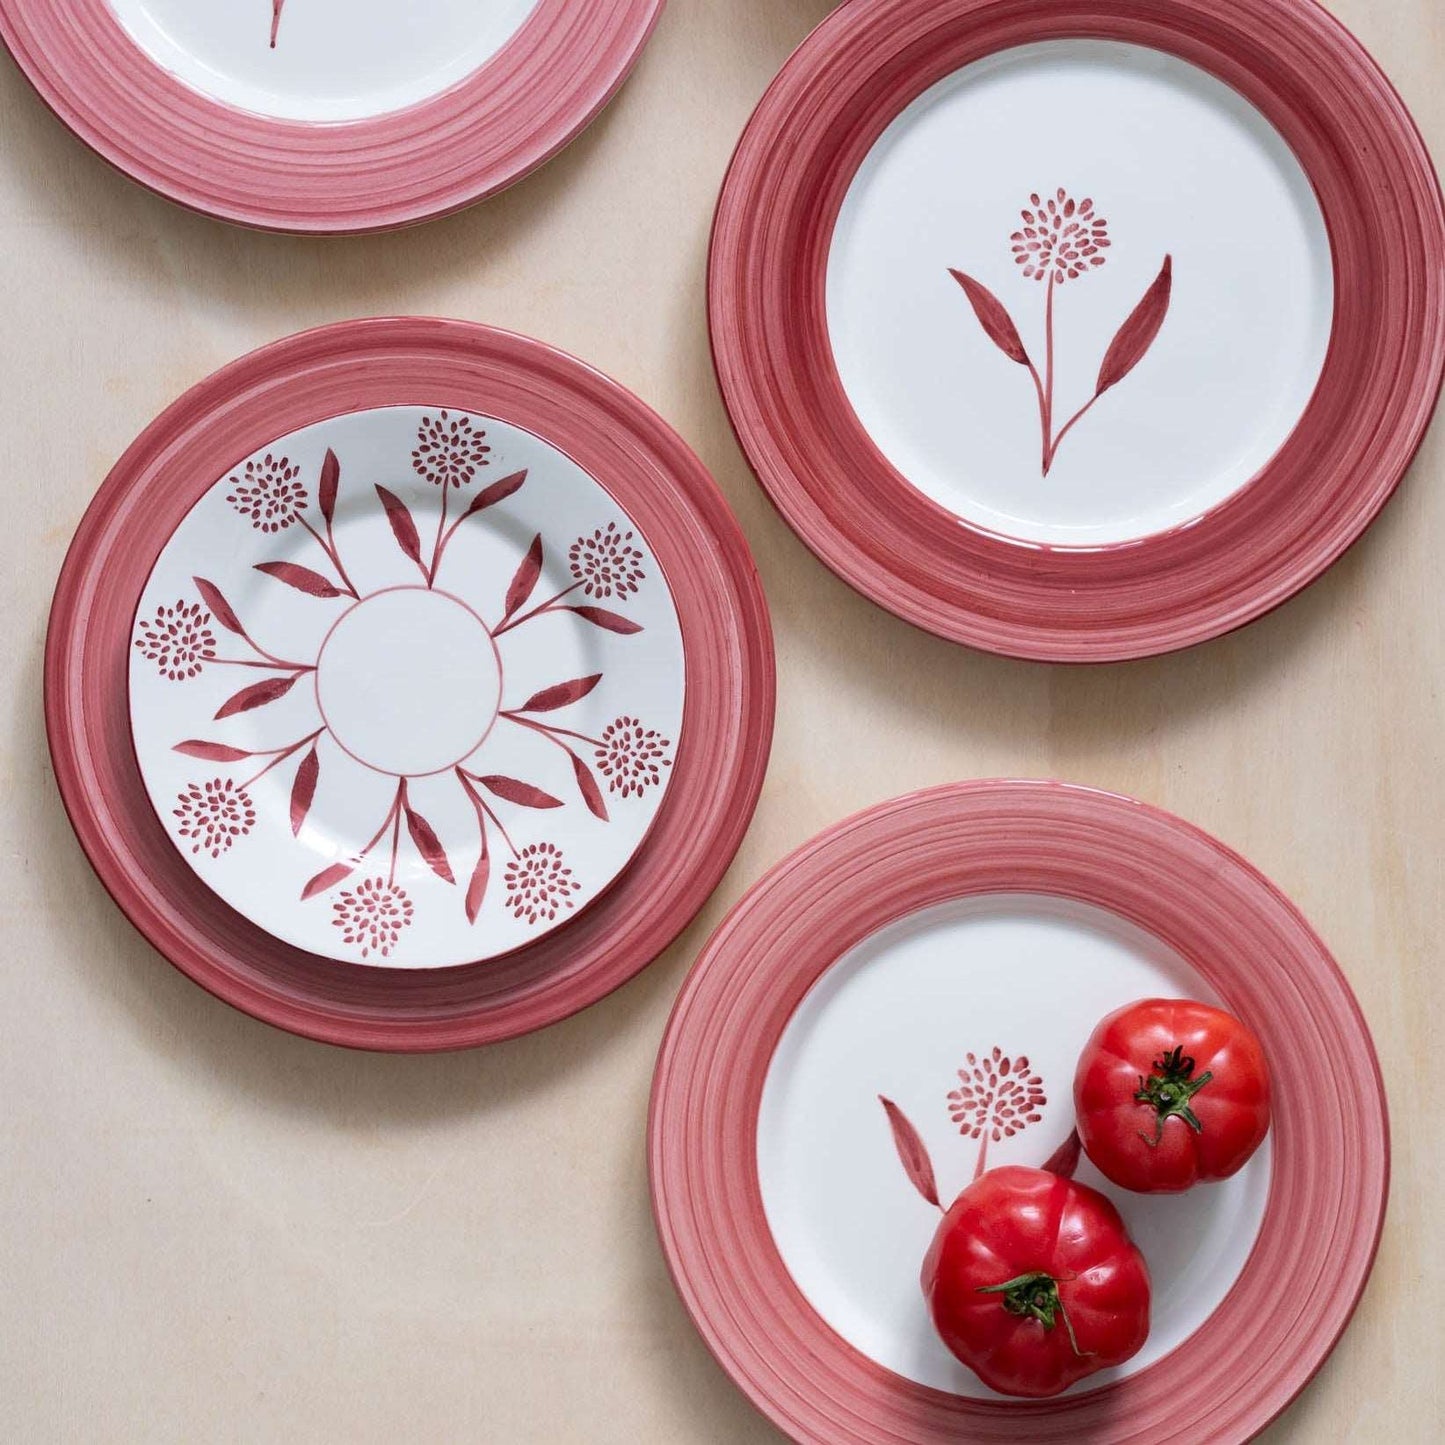 Cecilia Hand-Painted Ceramic Dinner Plate - Red and white - on the table - Matching with Cora Dessert Plate